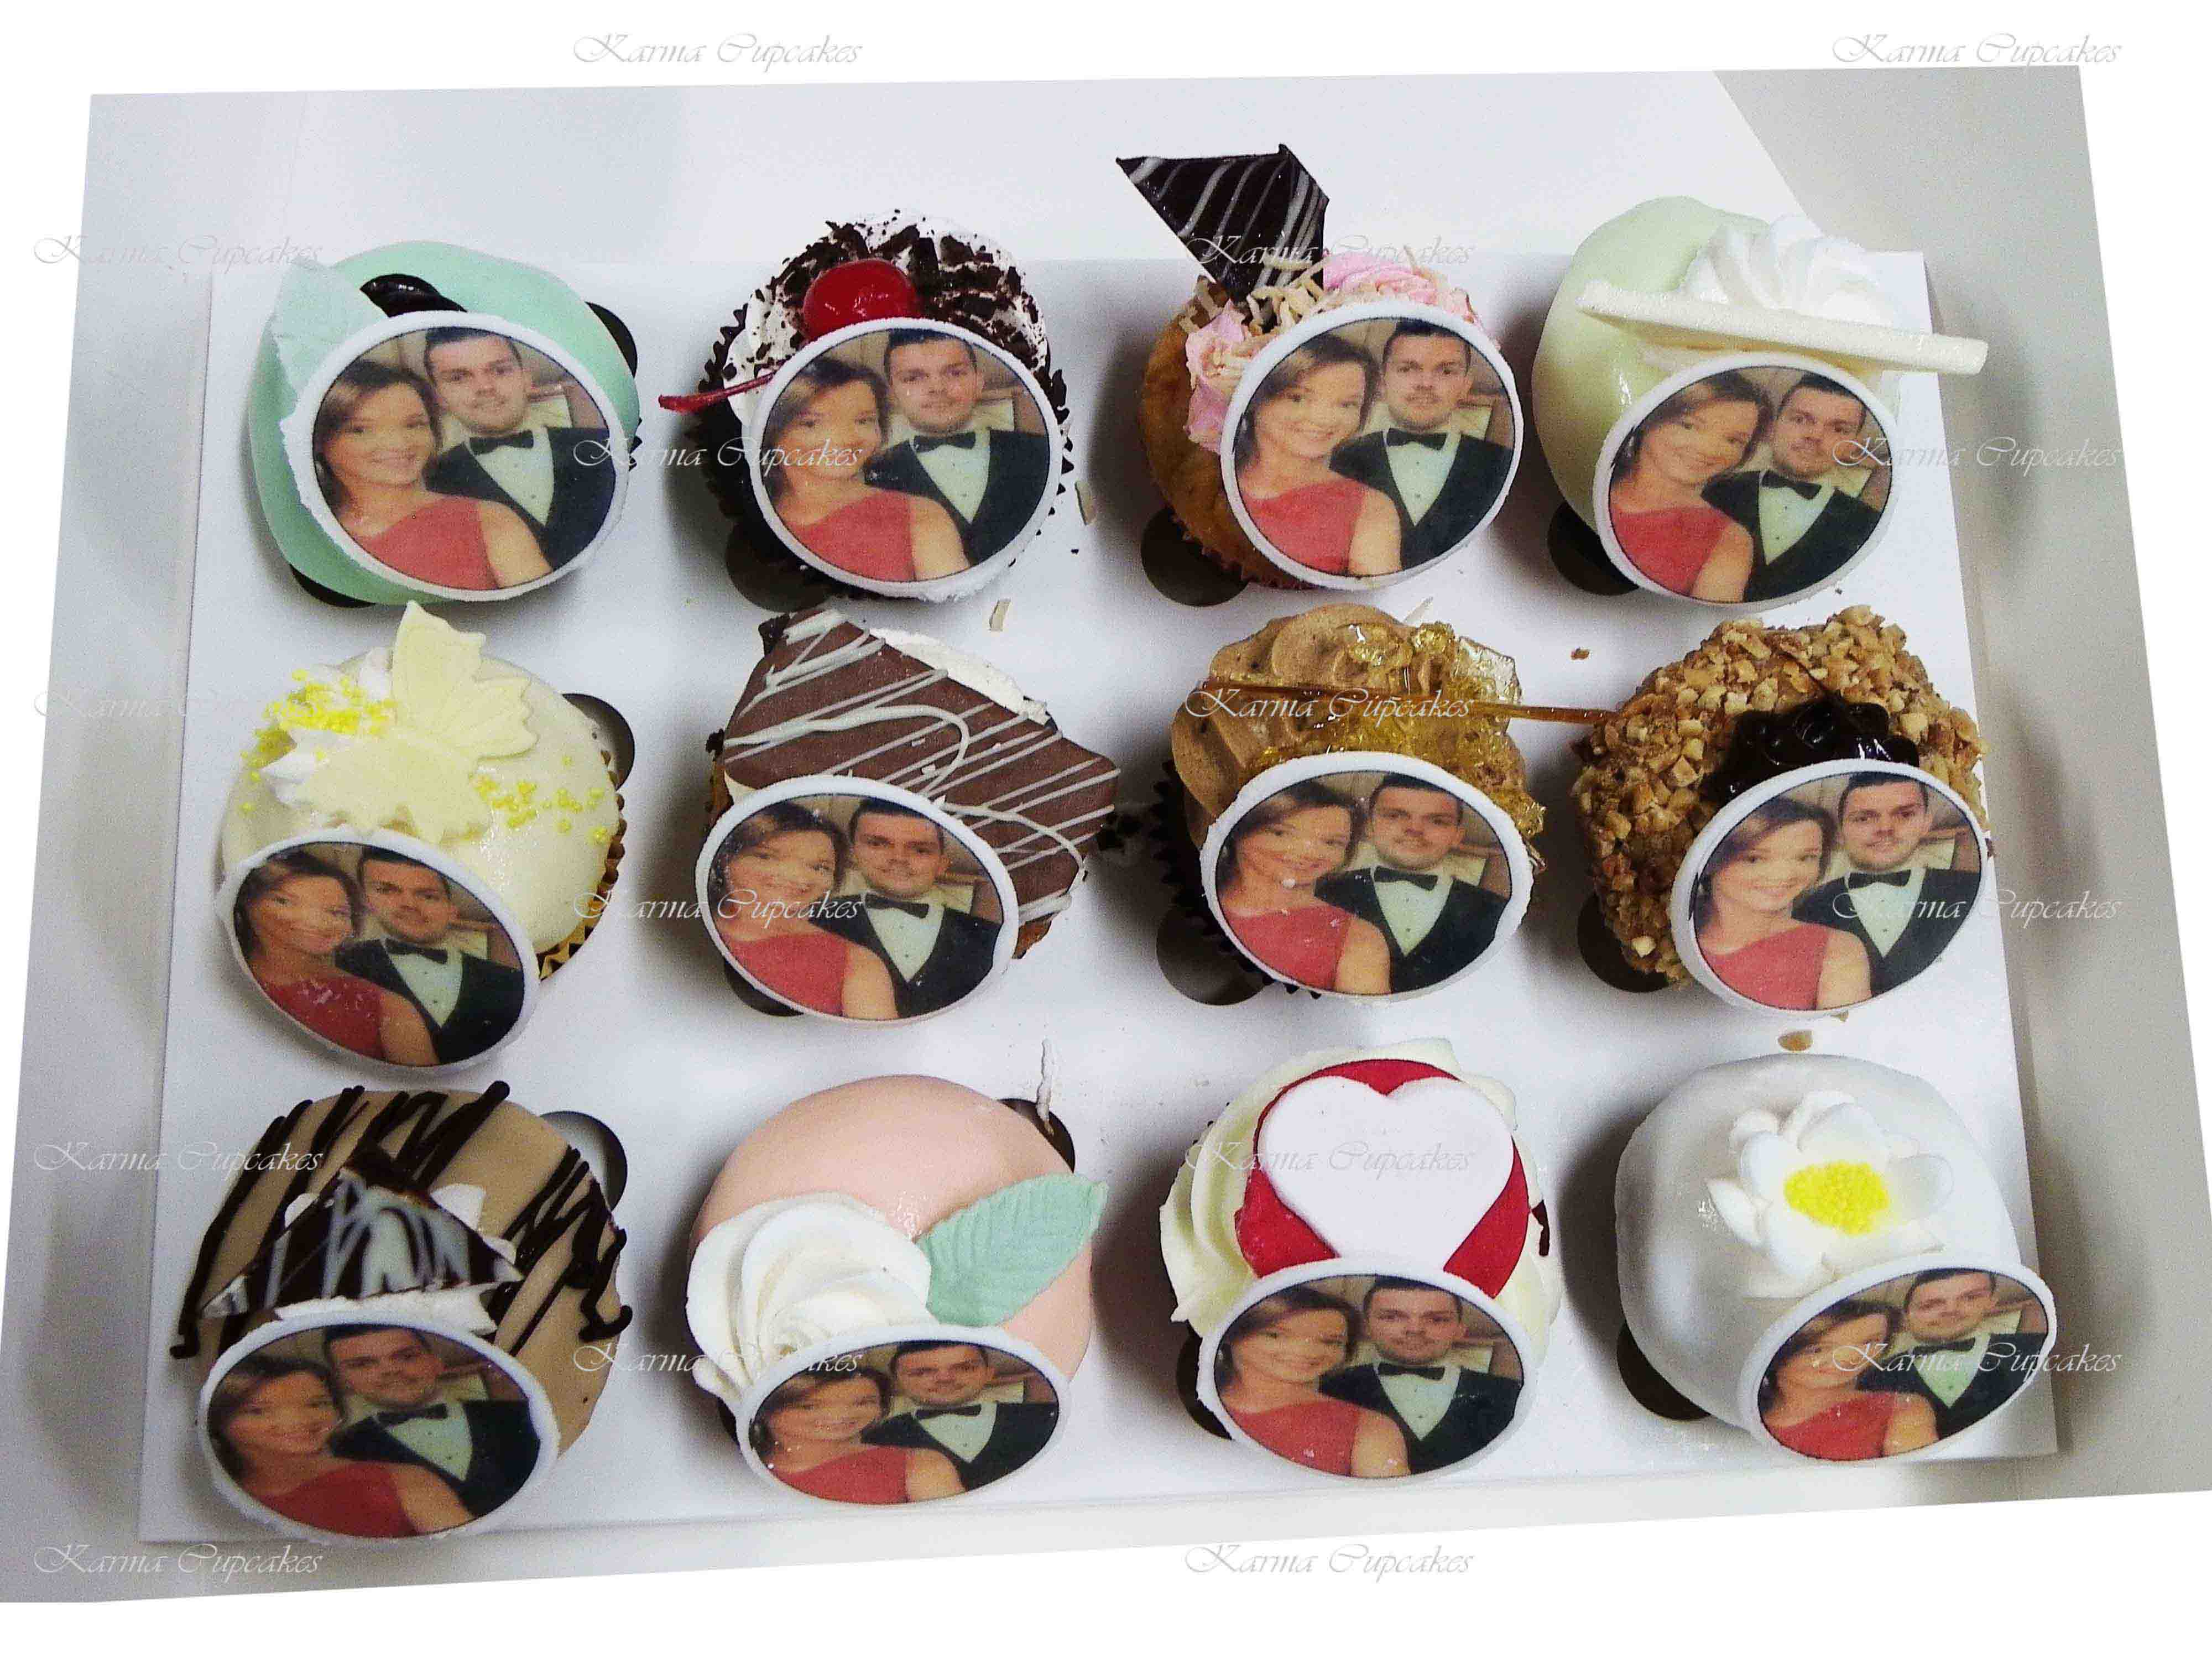 Mystery box of Gourmet Cupcakes with Edible Photo